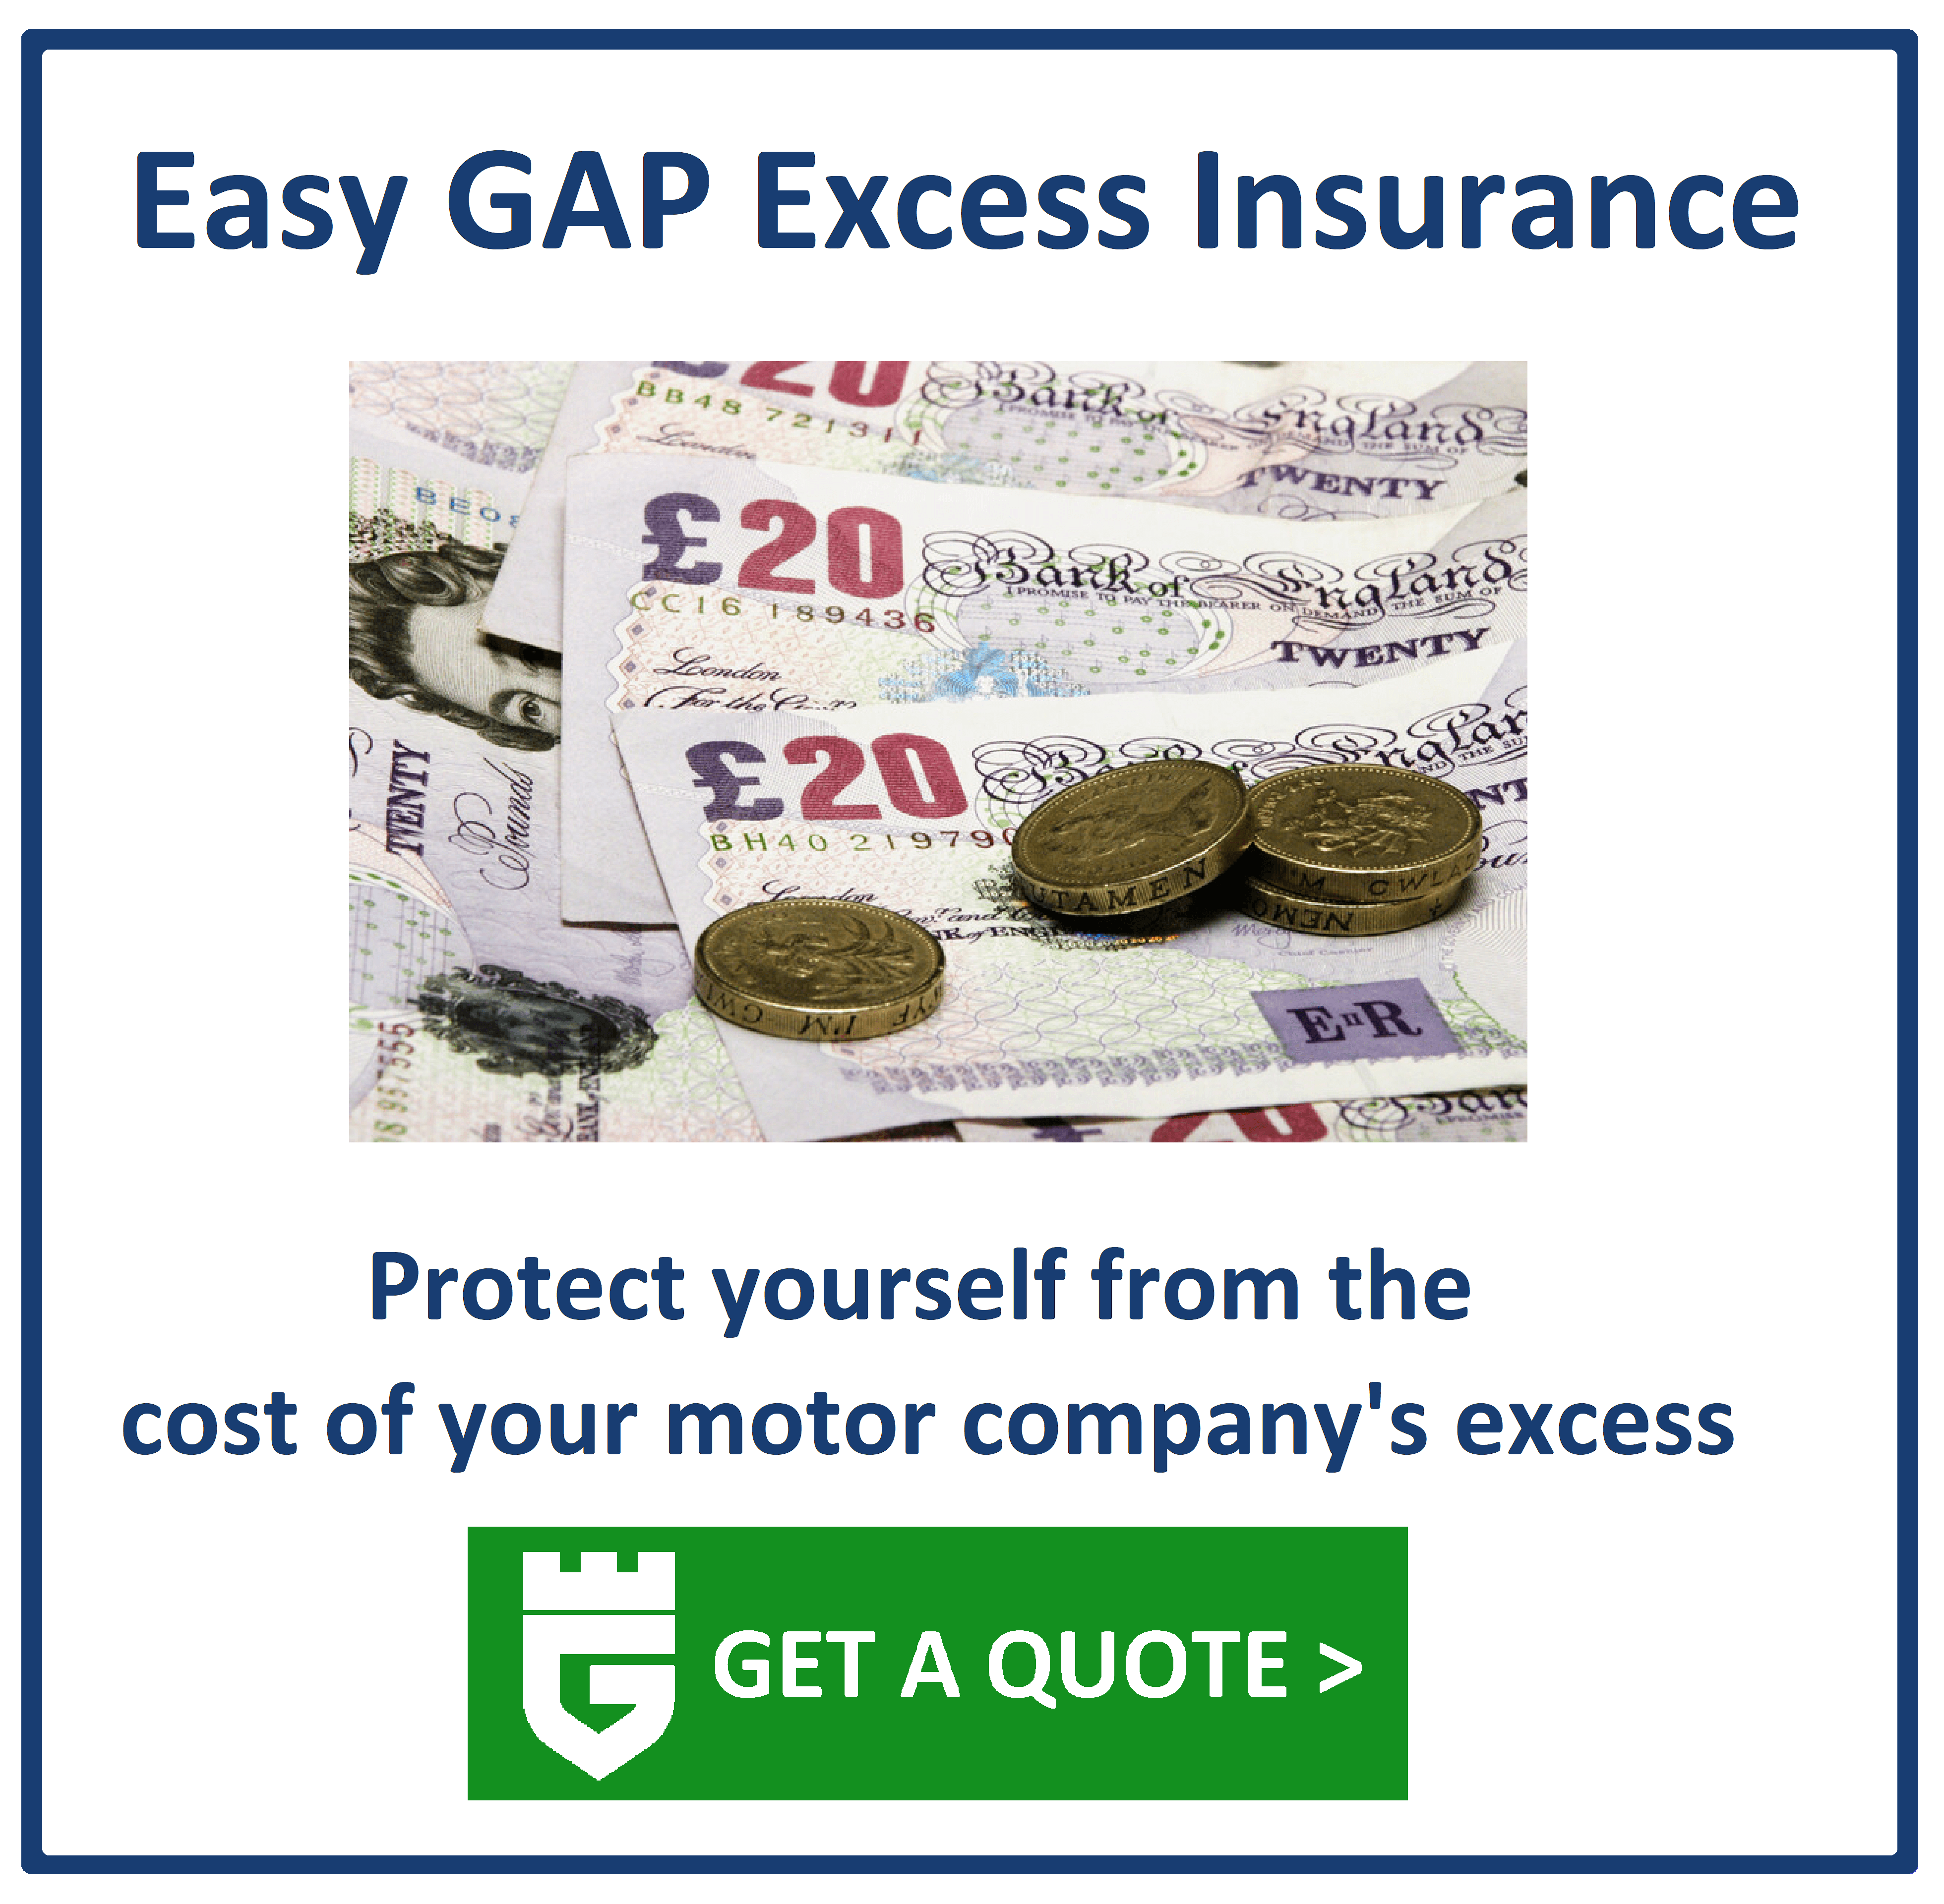 Click for an instant Excess Insurance Quote